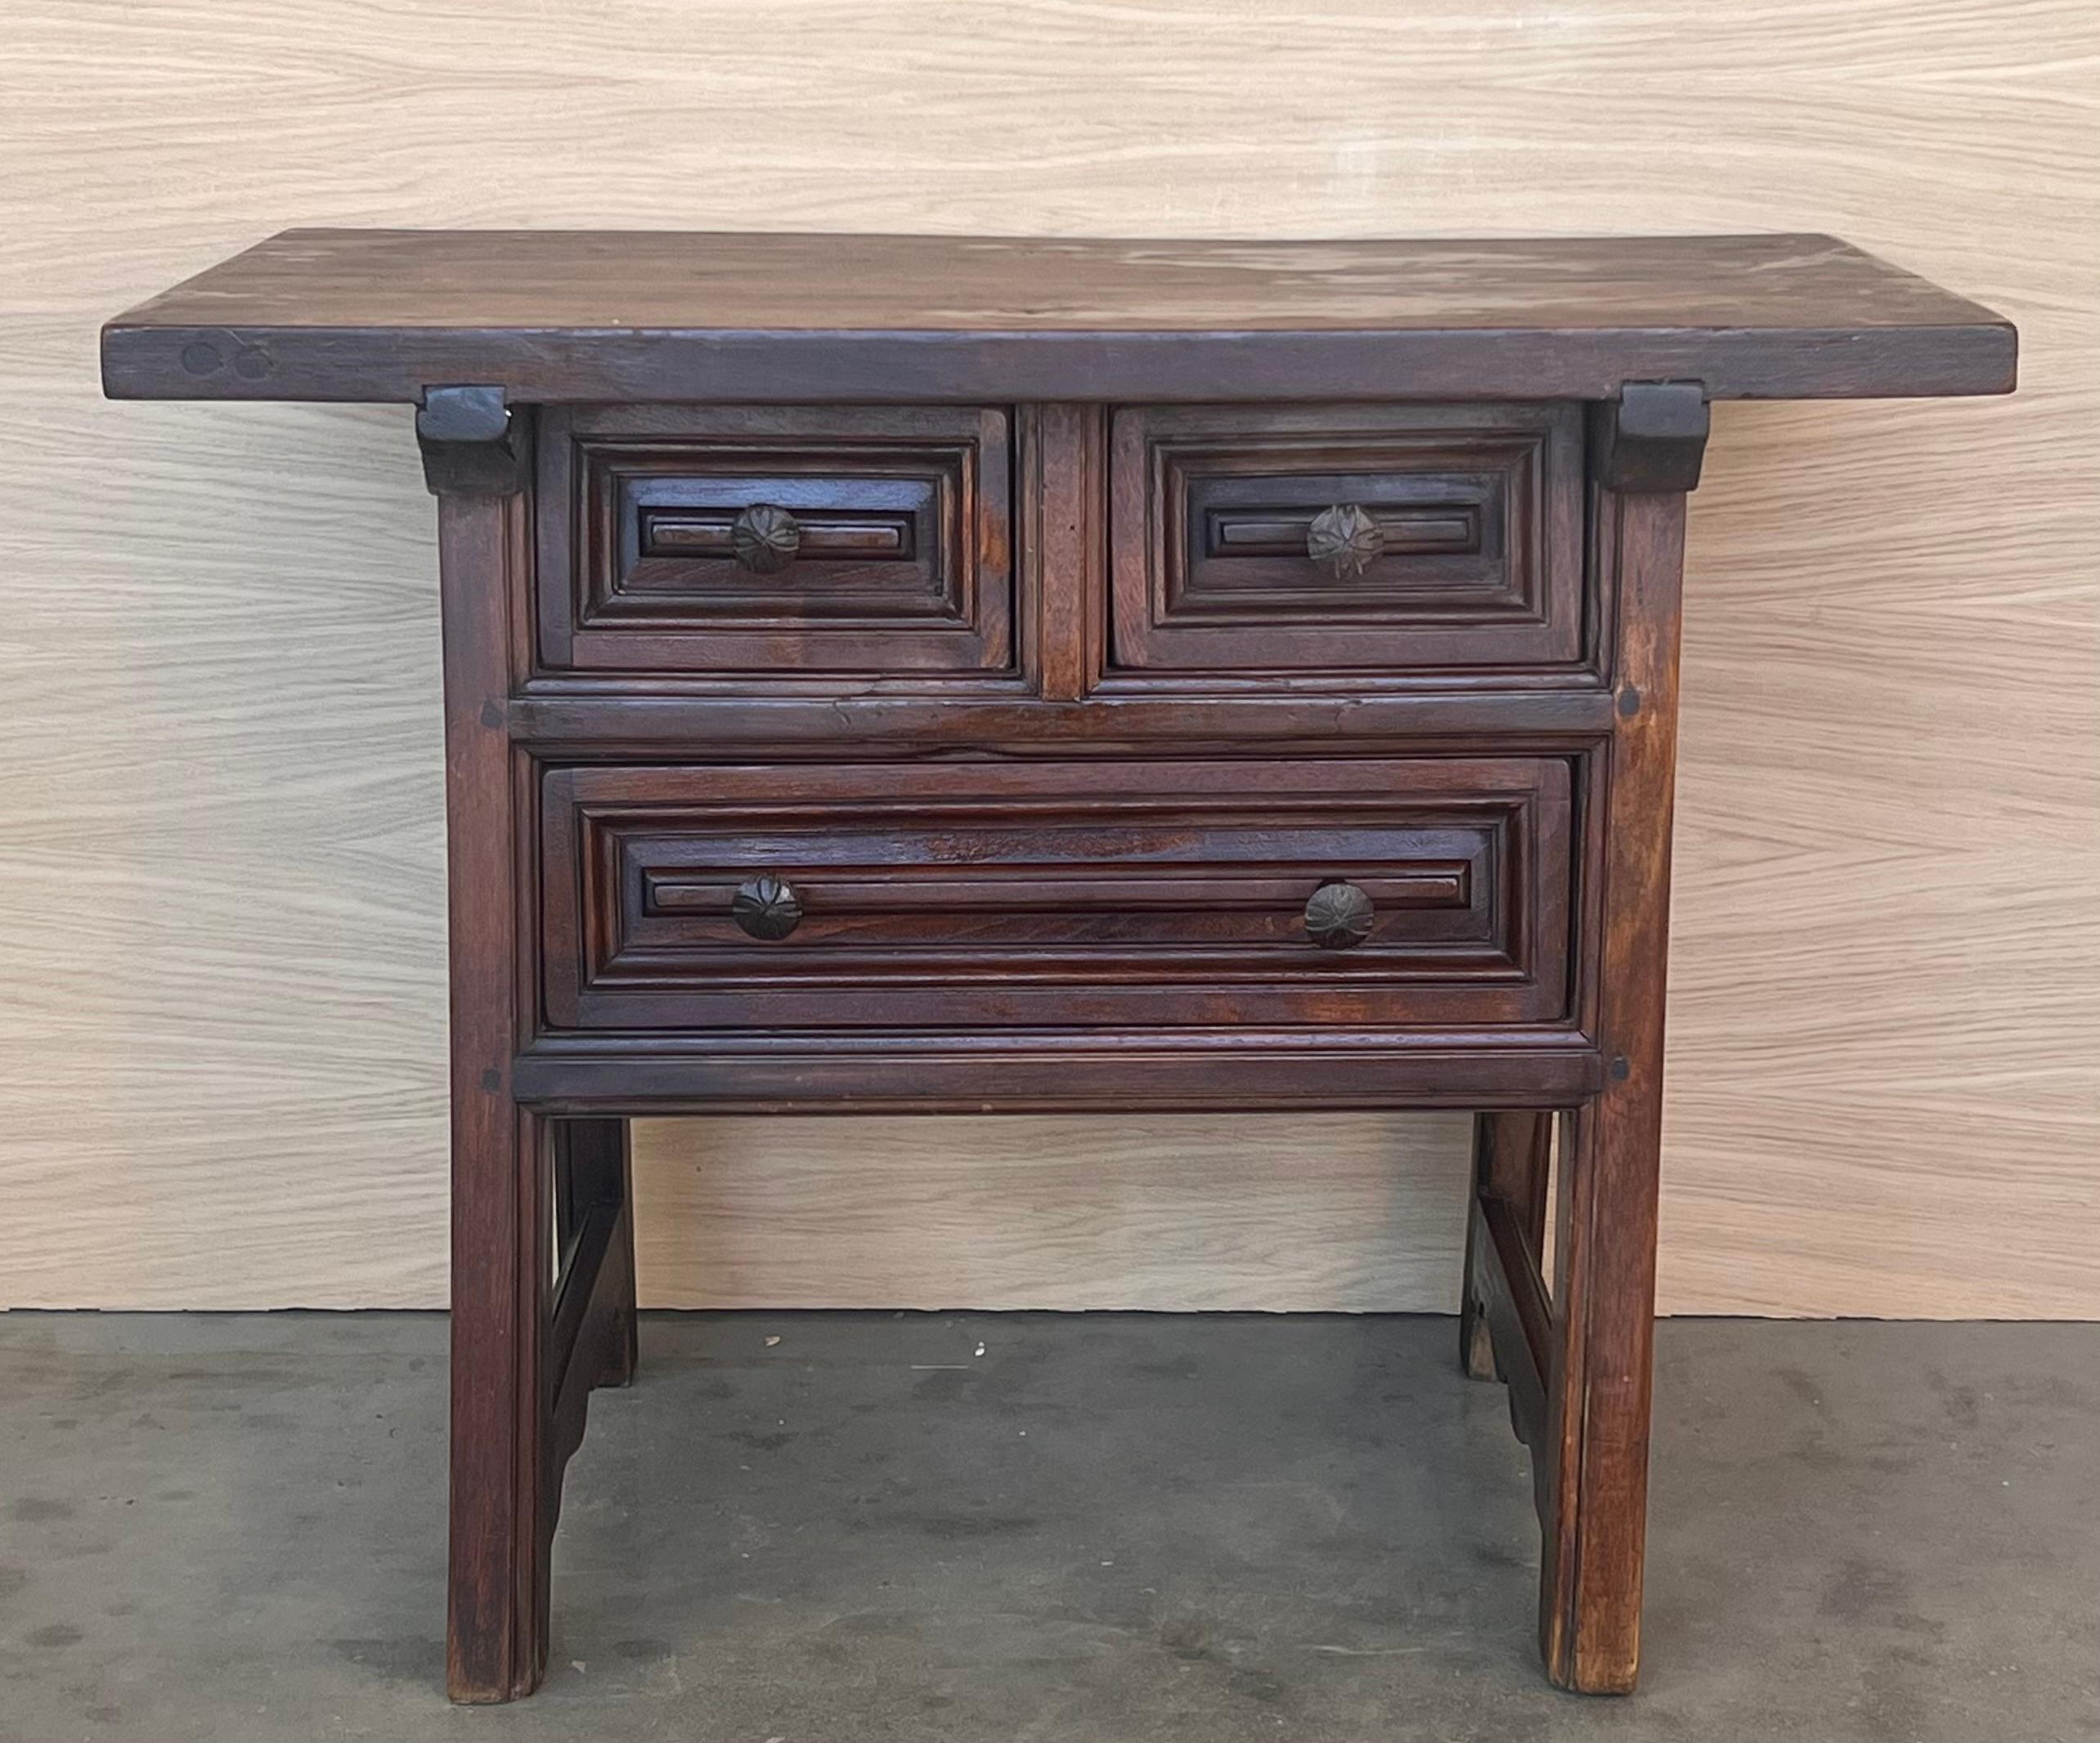 This rustic artisan made side table hails from the Pyrenees on the French-Spanish border. It is constructed from local woods and still boasts original hand forged pulls. Called a 